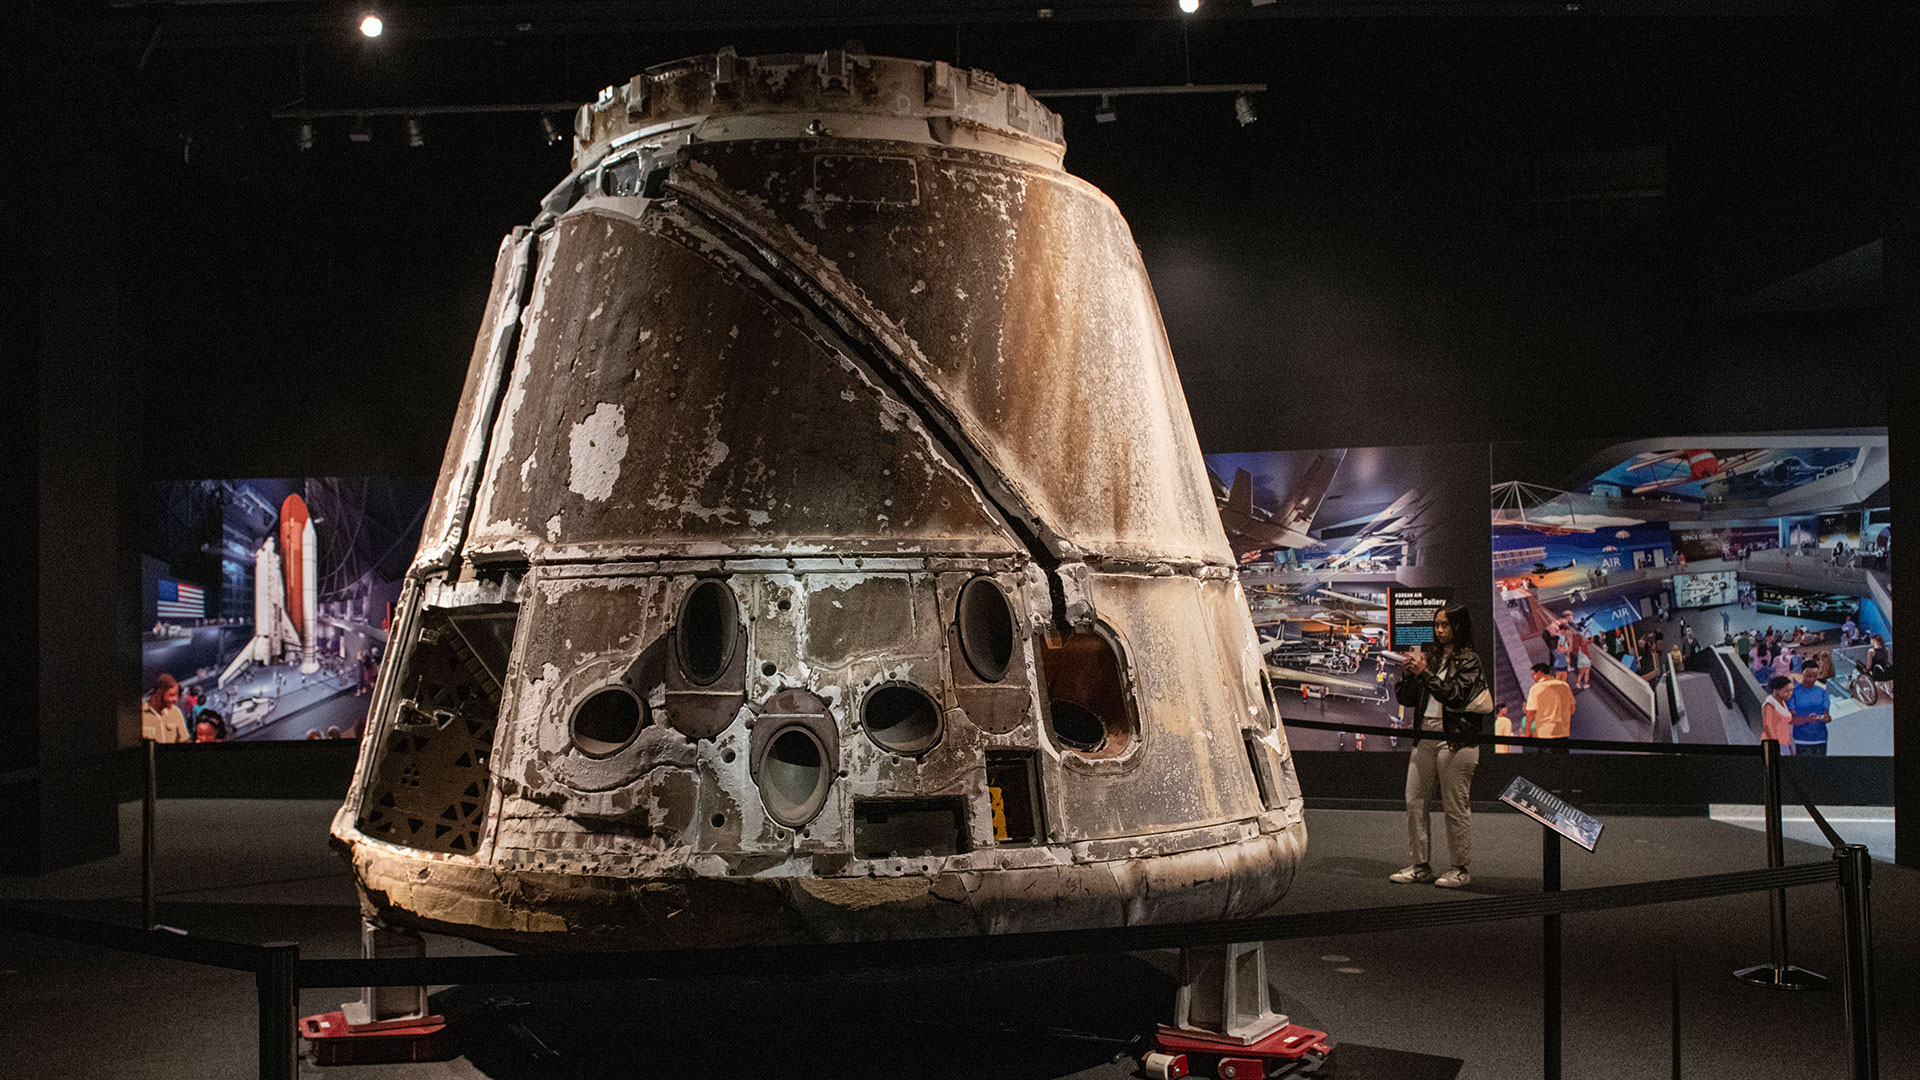 SpaceX Dragon capsule on display ahead of joining space shuttle LA exhibit Space